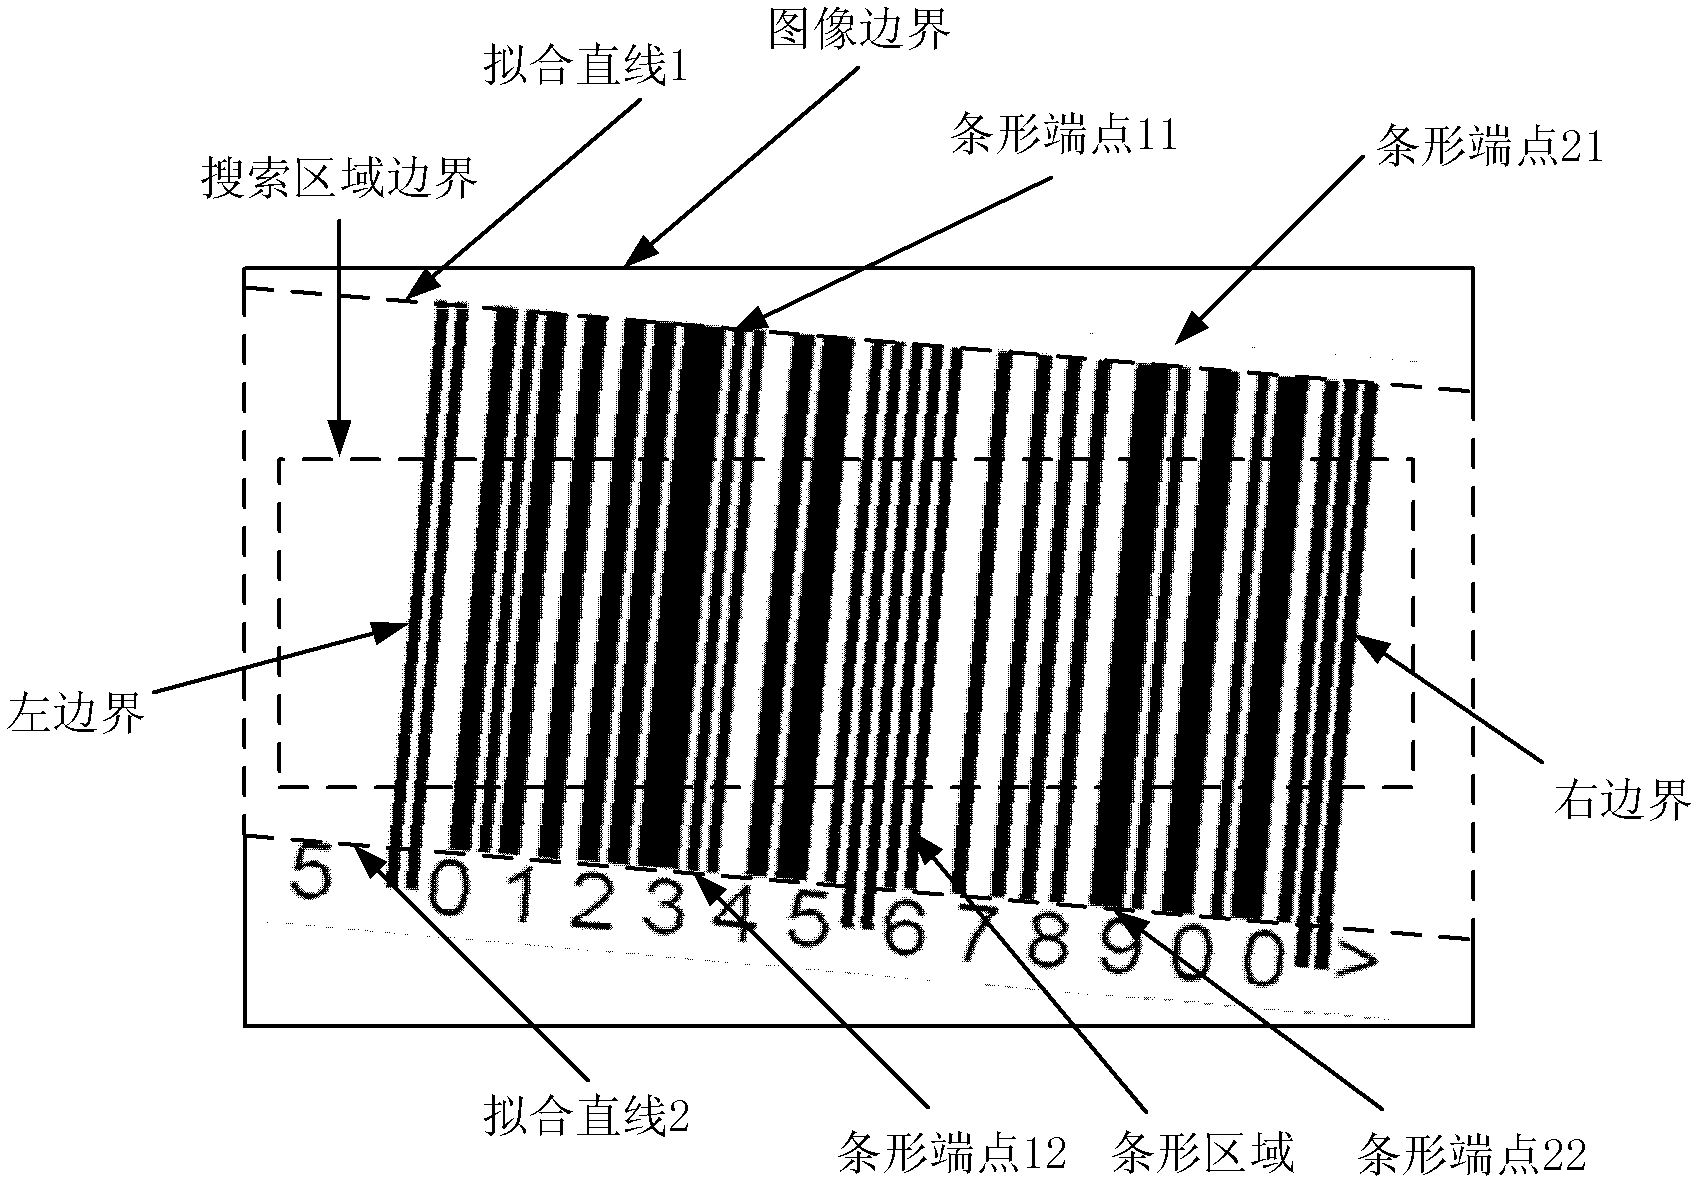 Bar code positioning method and bar code detection device